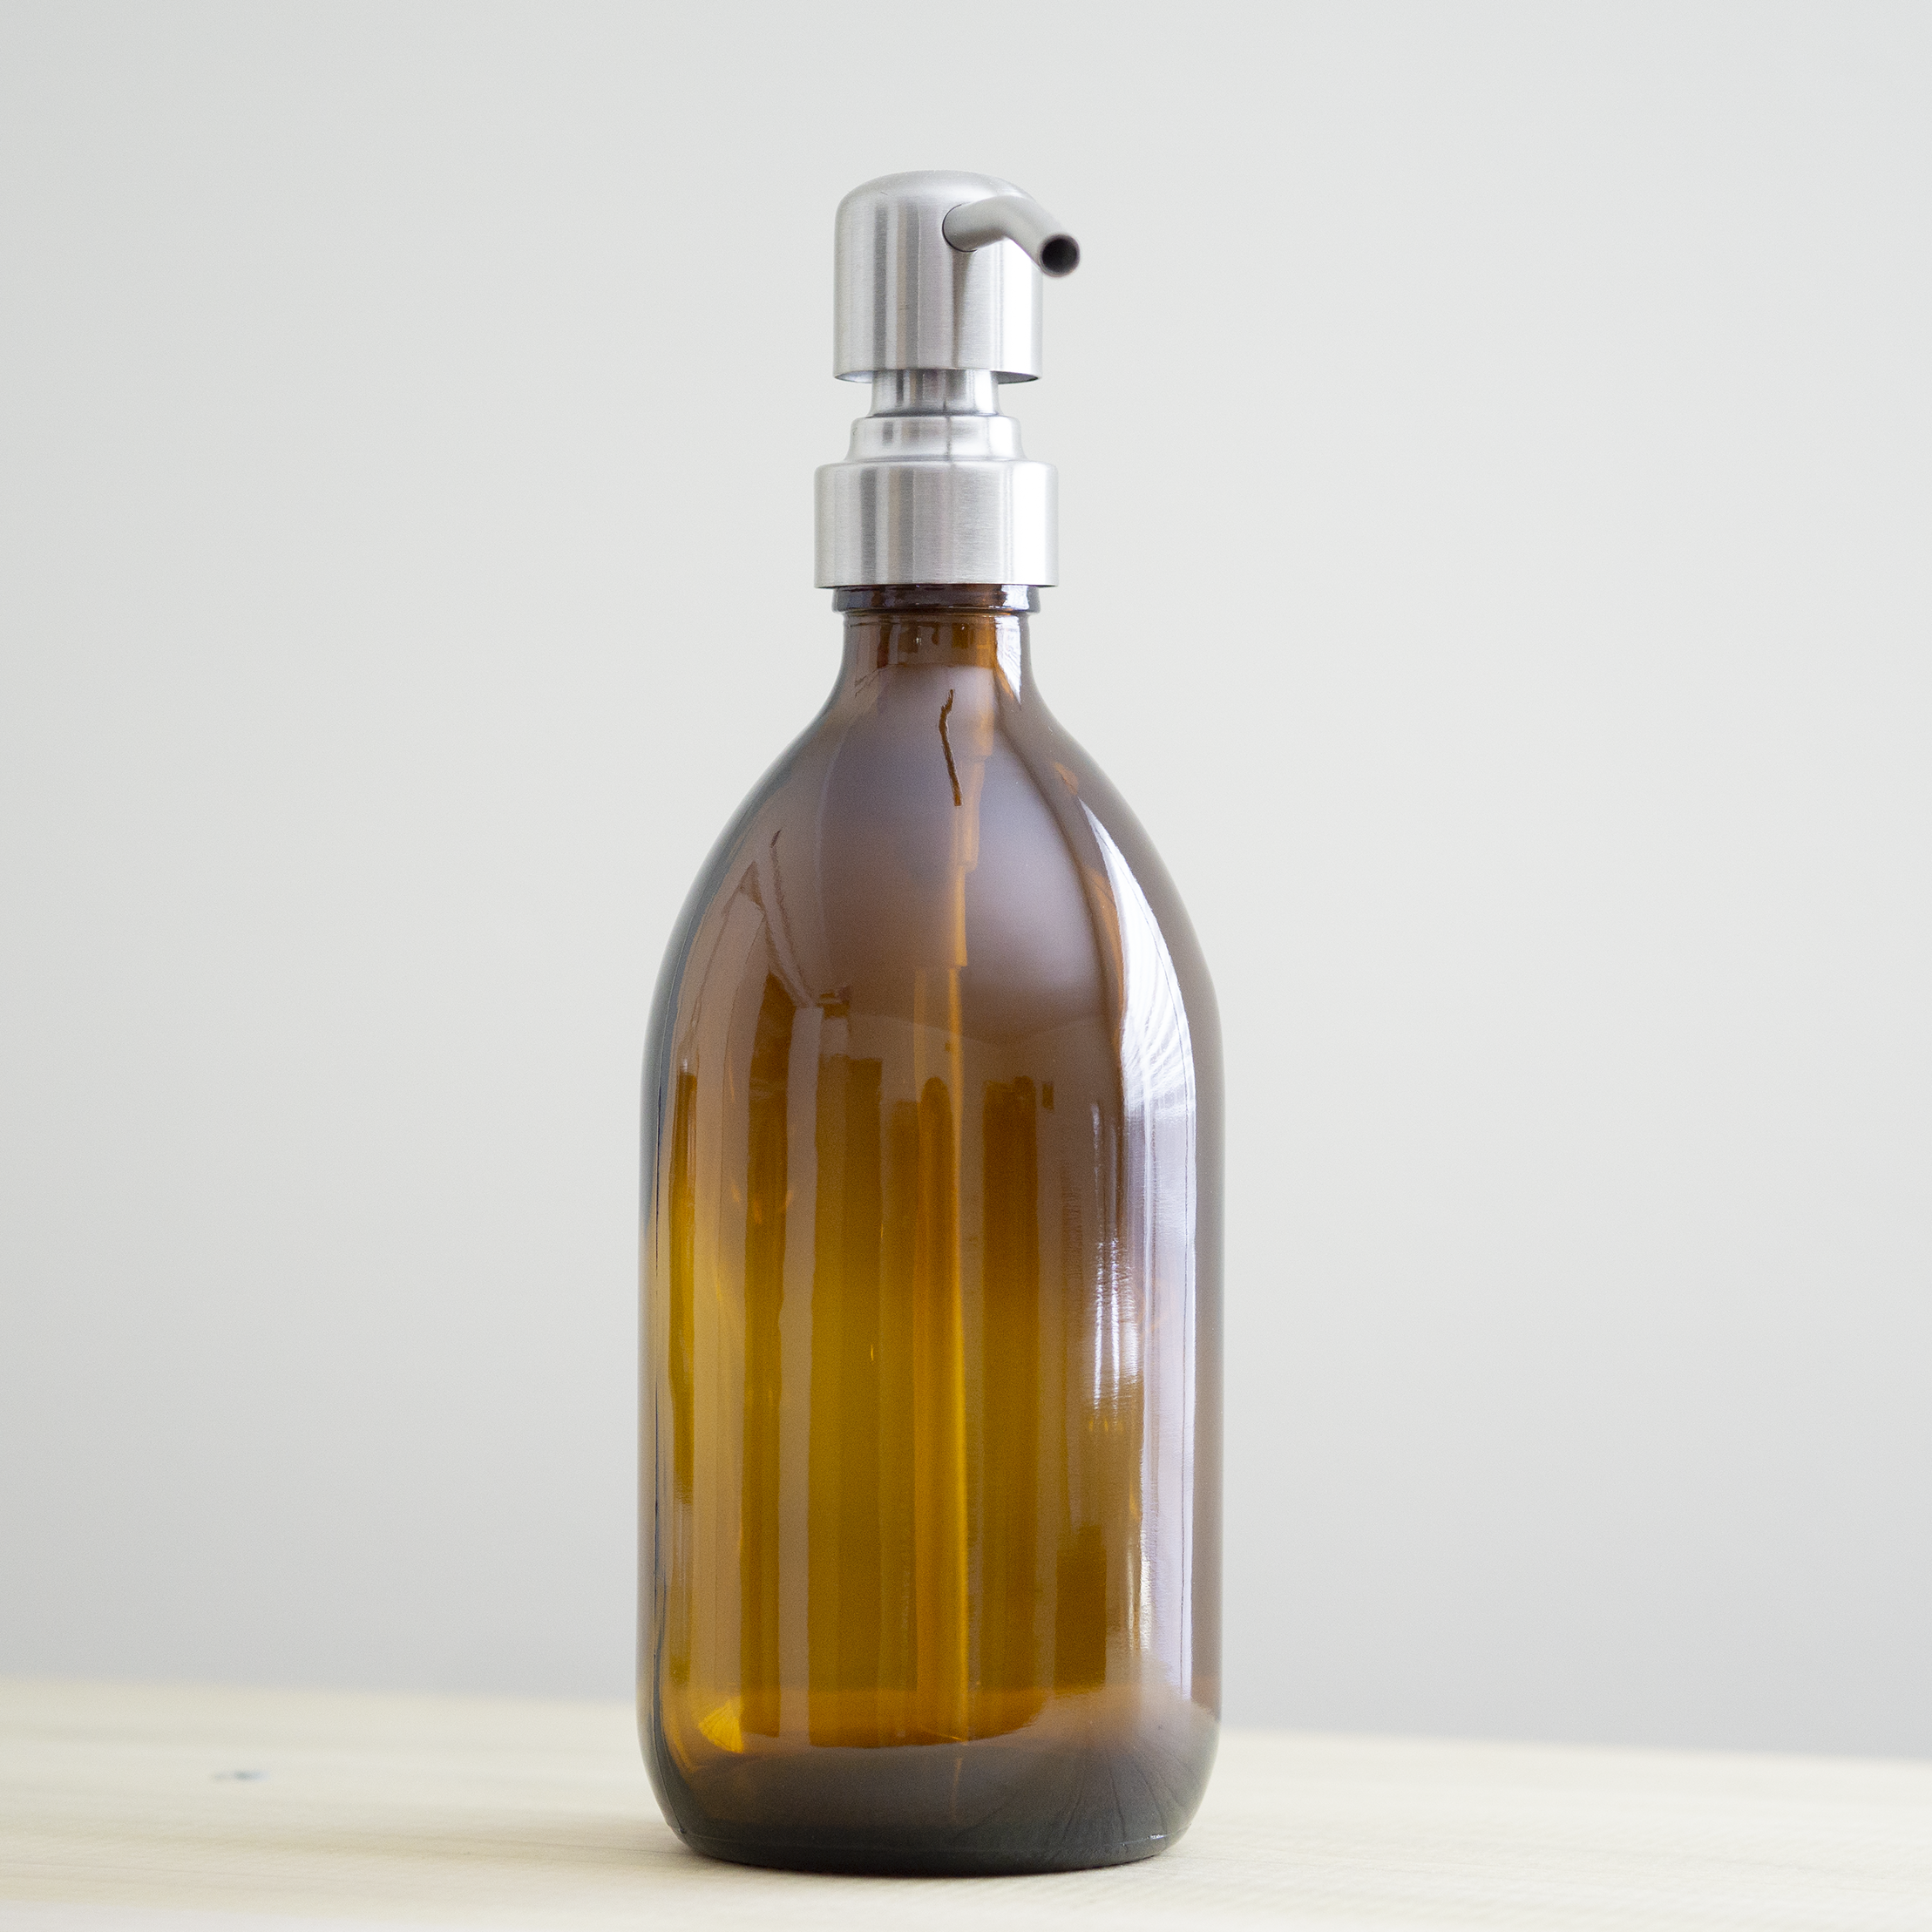 Amber glass 16 oz apothecary bottle with 304 grade stainless steel pump.